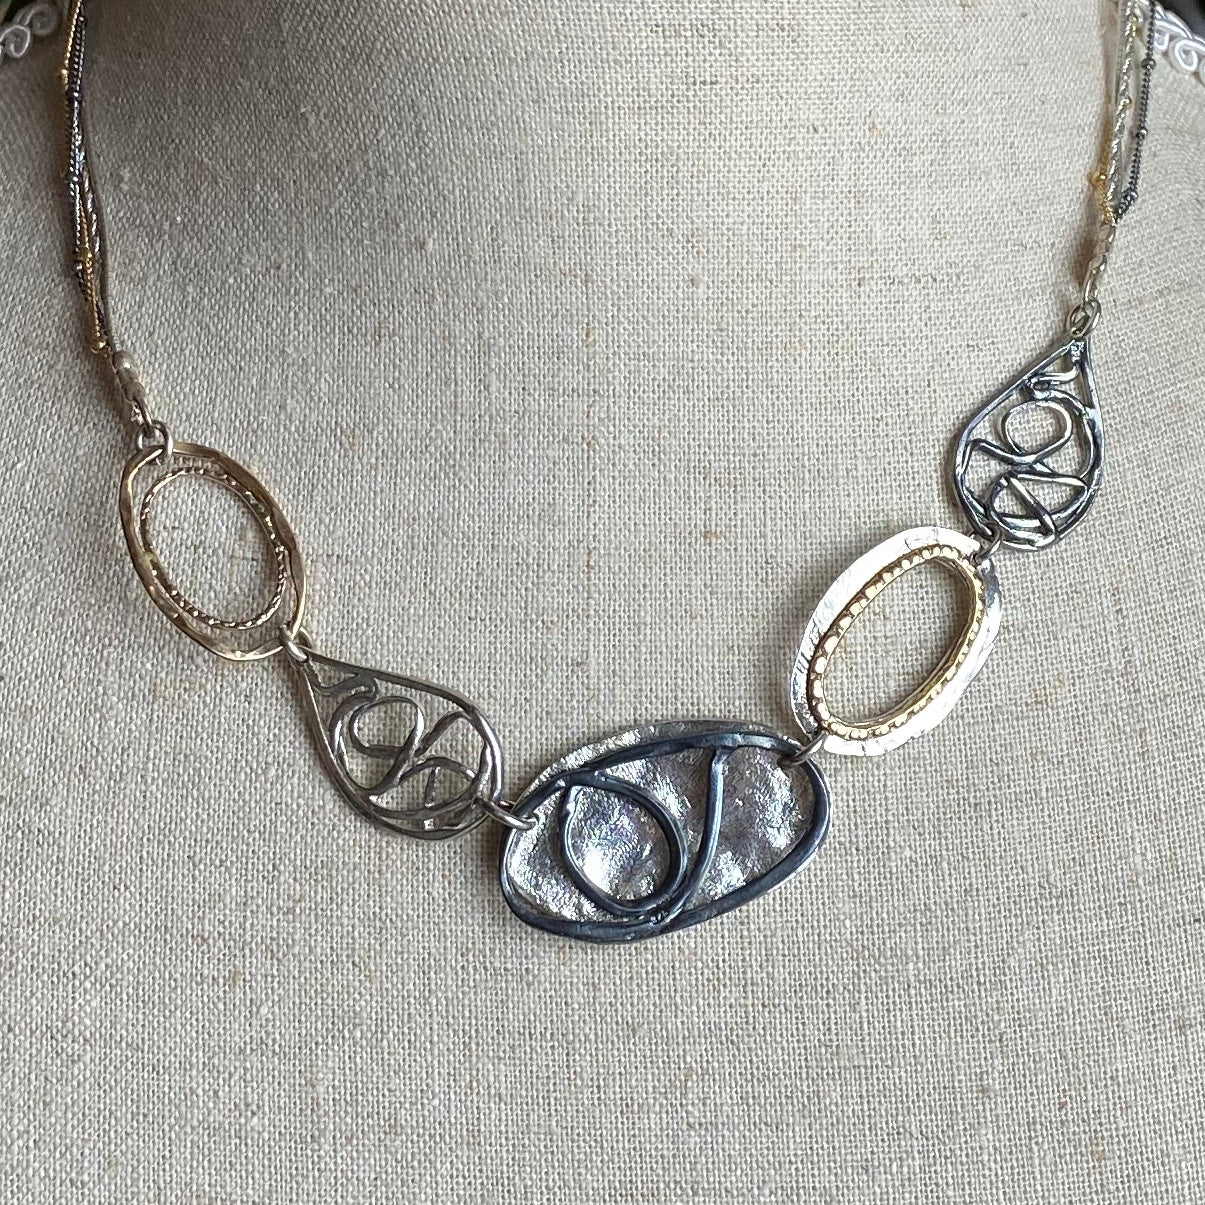 Mixed Metals Necklace - The Nancy Smillie Shop - Art, Jewellery & Designer Gifts Glasgow